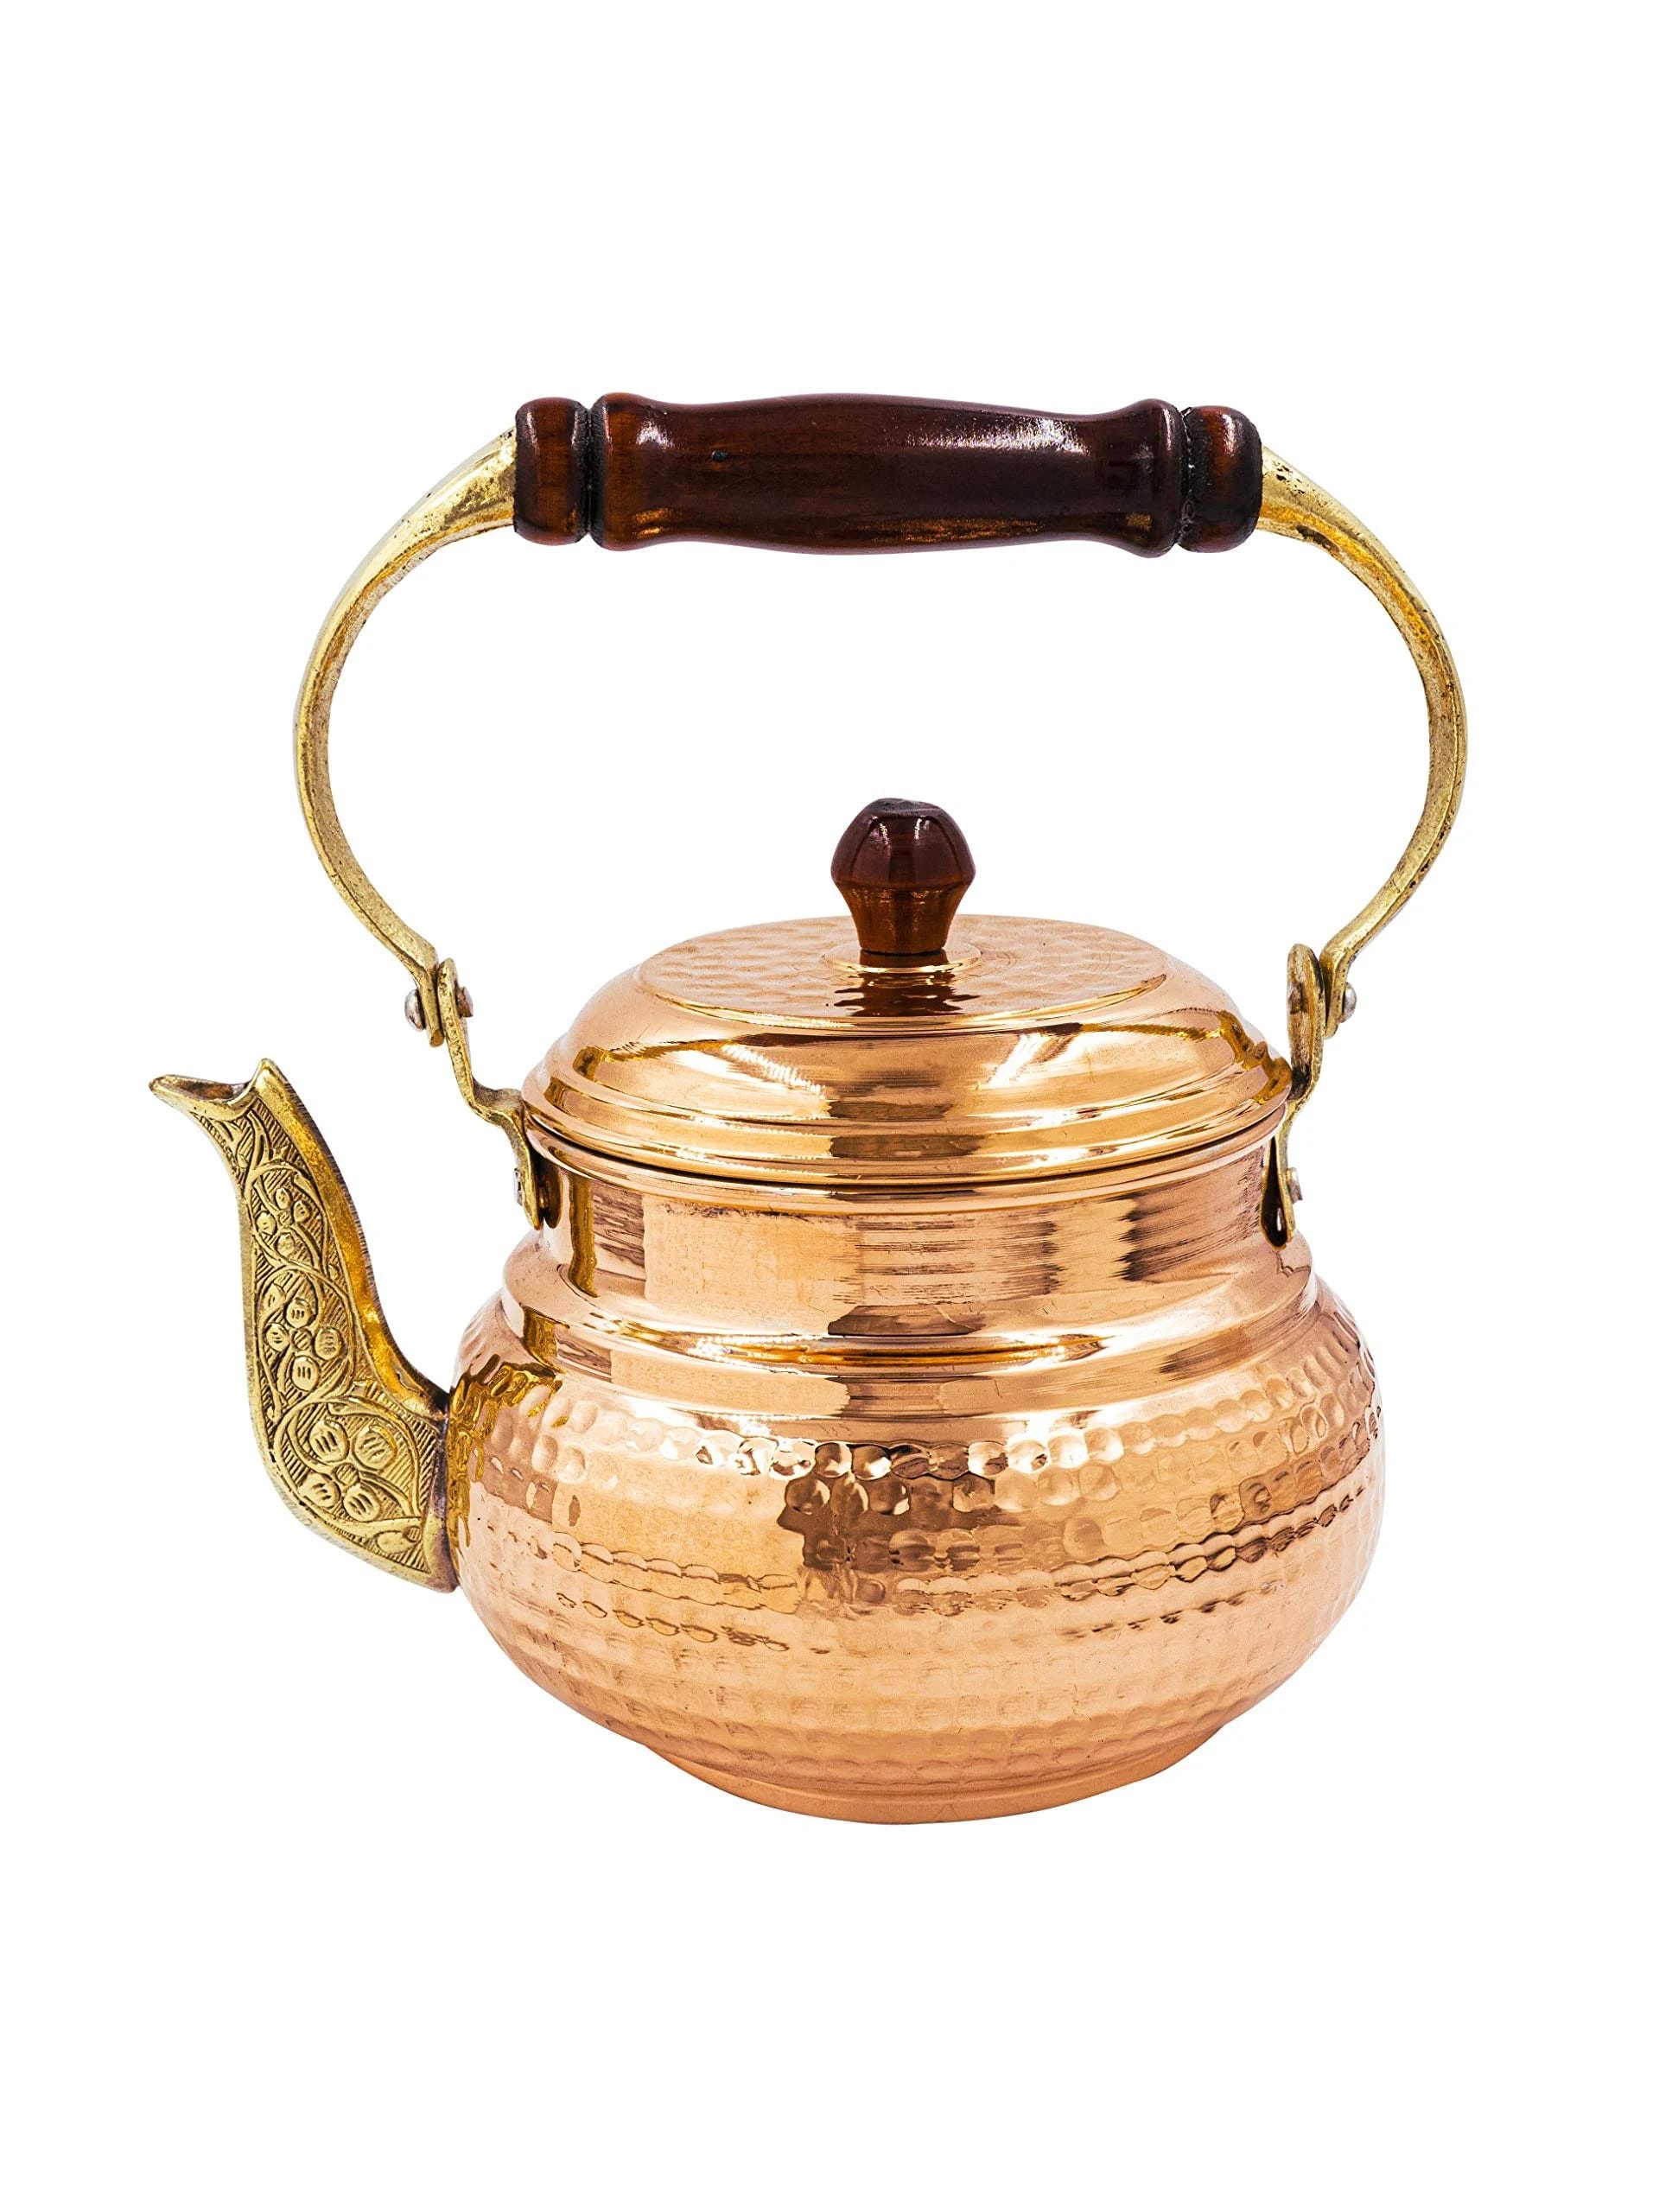 Handmade Copper Teapot: Perfect for Brewing Tea and Coffee | Image